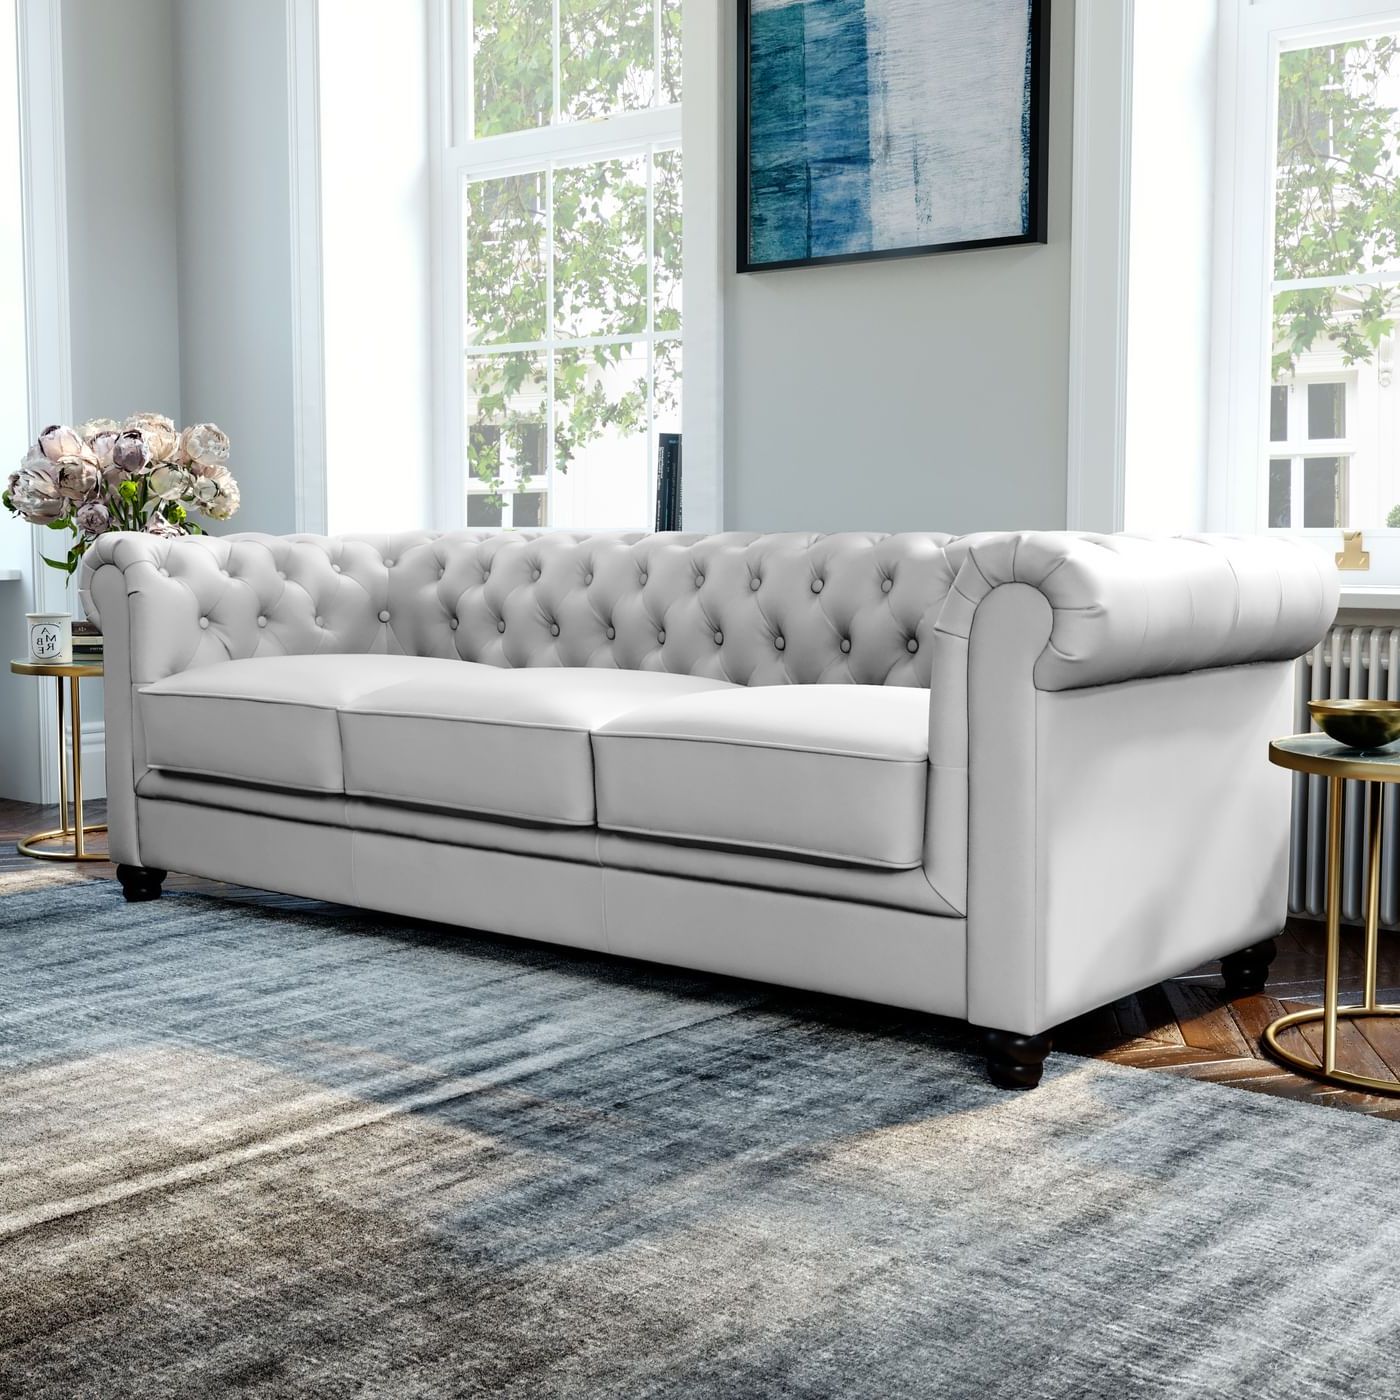 Furniture Choice With Regard To Sofas In Light Gray (View 2 of 15)